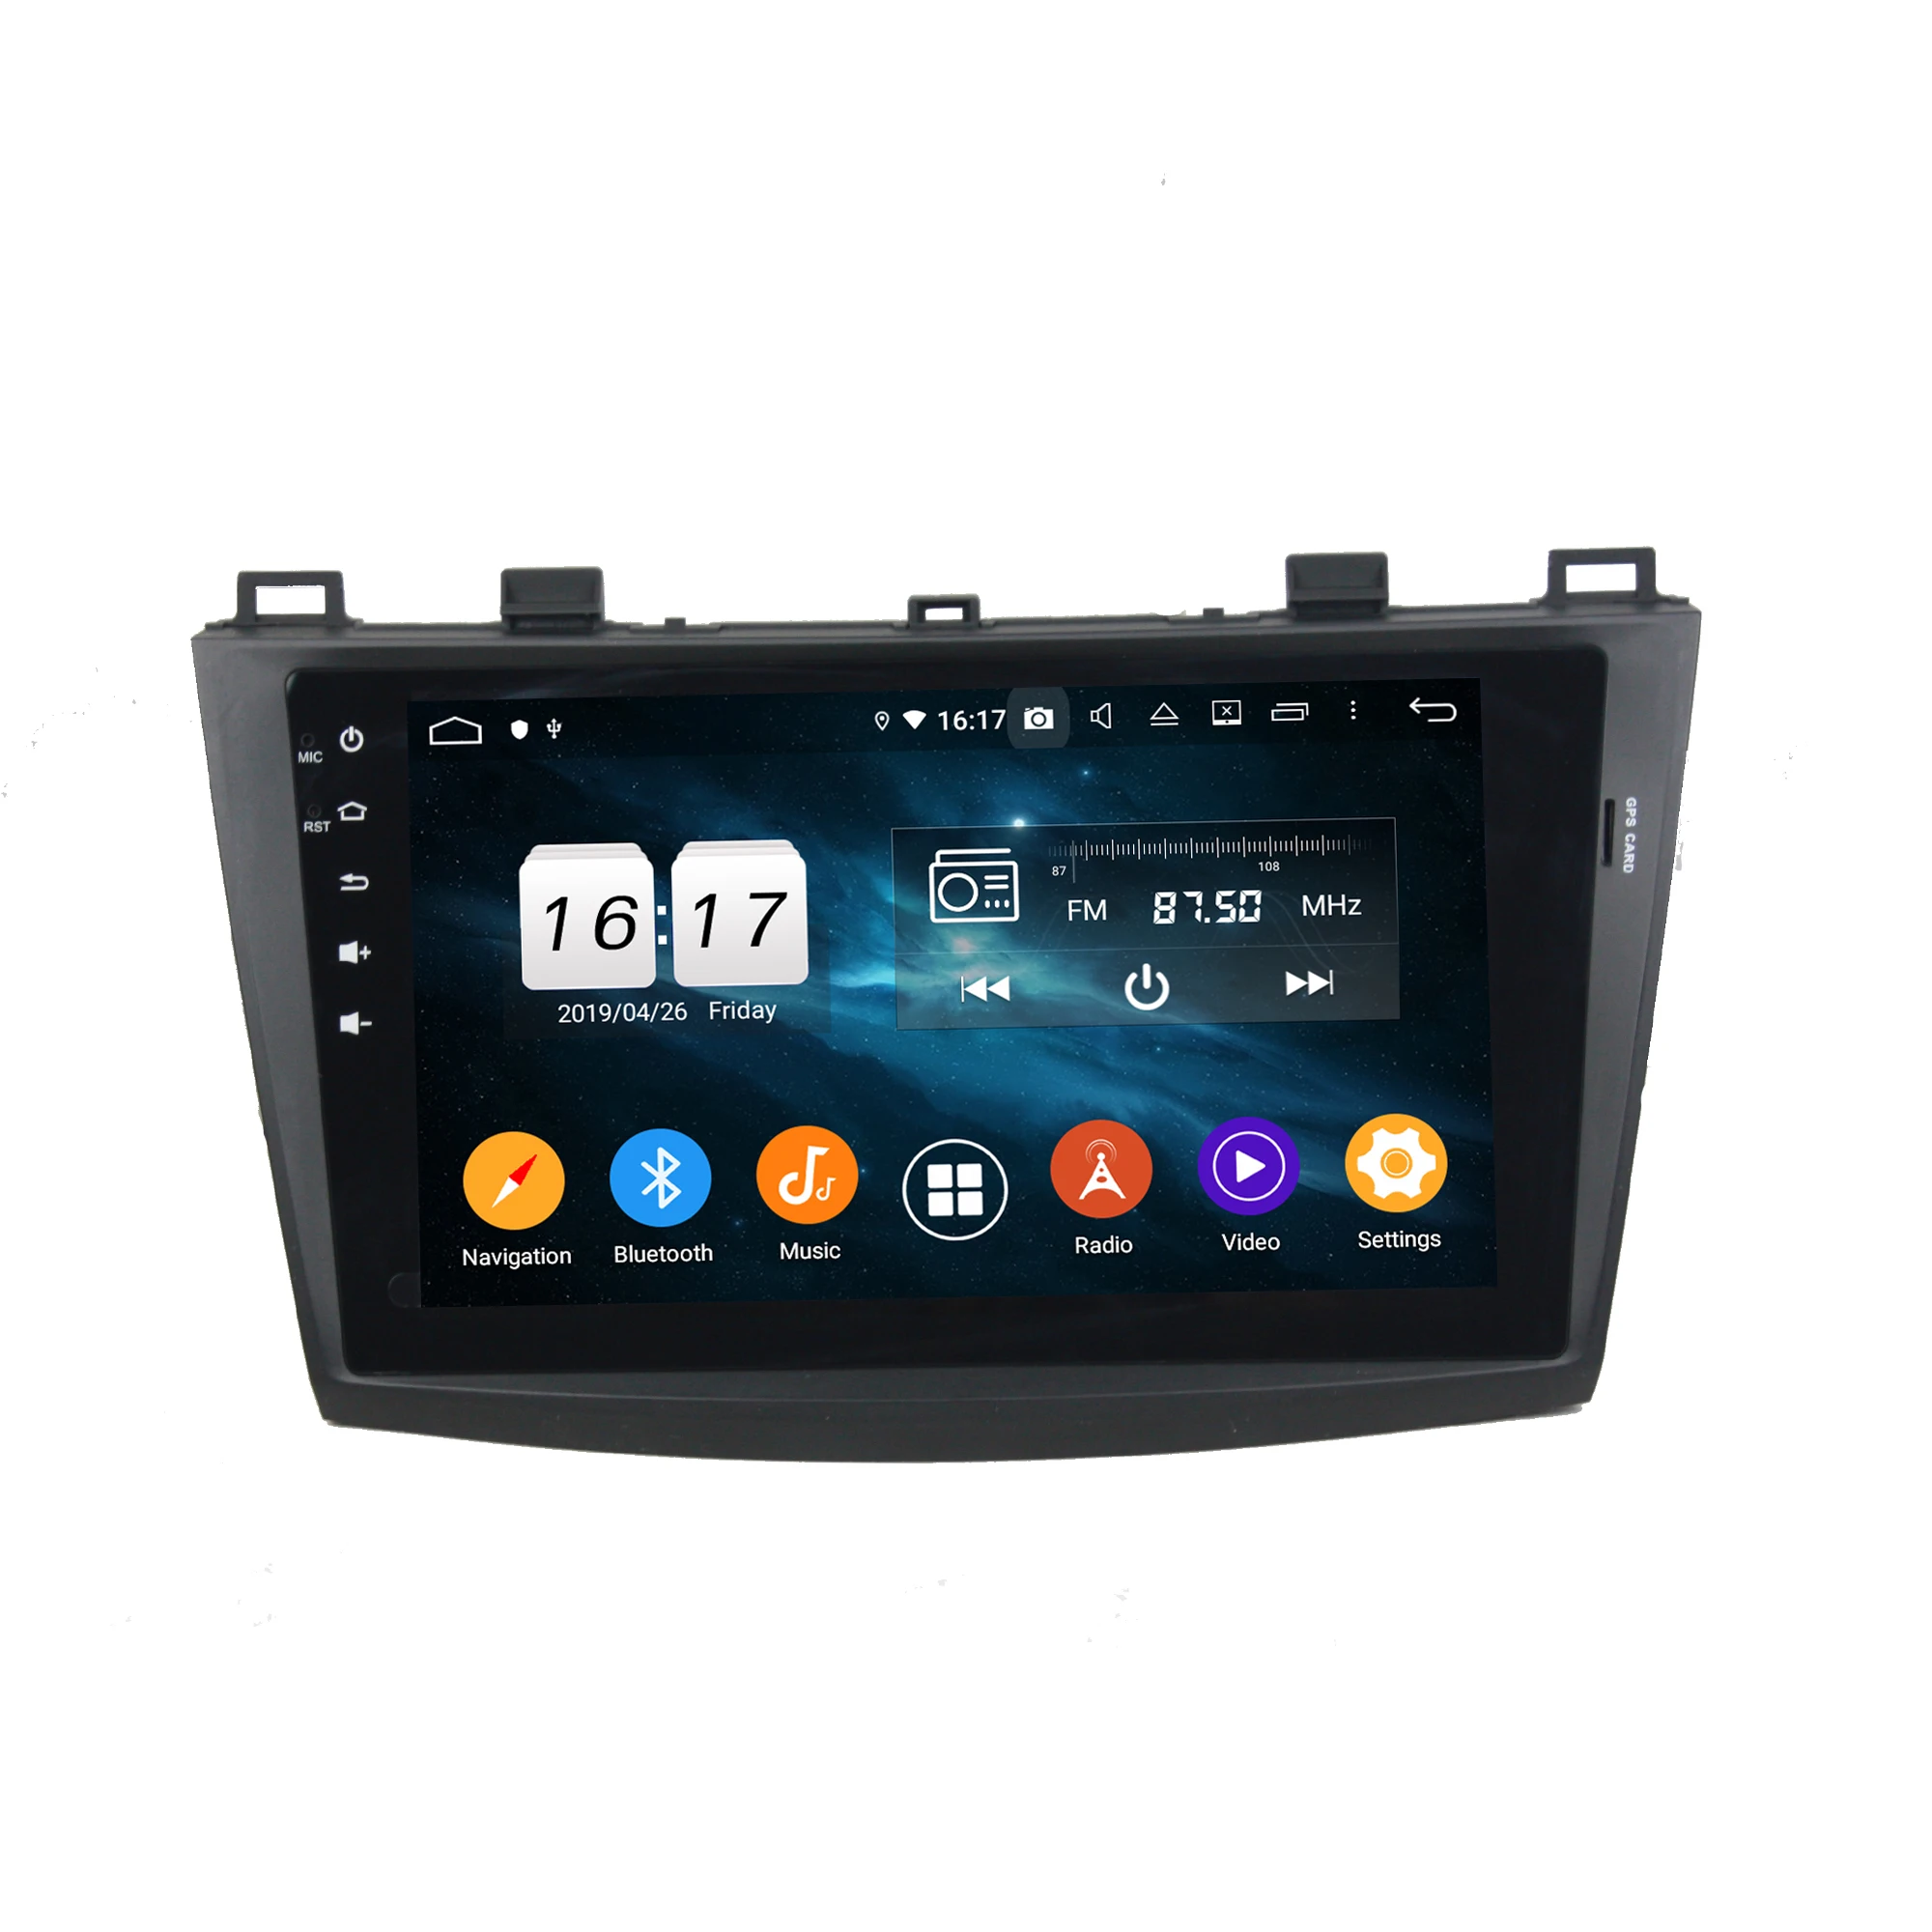 Cheap DSP 4GB+64GB PX5 9" Android 9.0 Car DVD GPS Glonass for Mazda 3 2010 2011 2012 Stereo Radio Bluetooth 4.2 WIFI Mirror-link 1